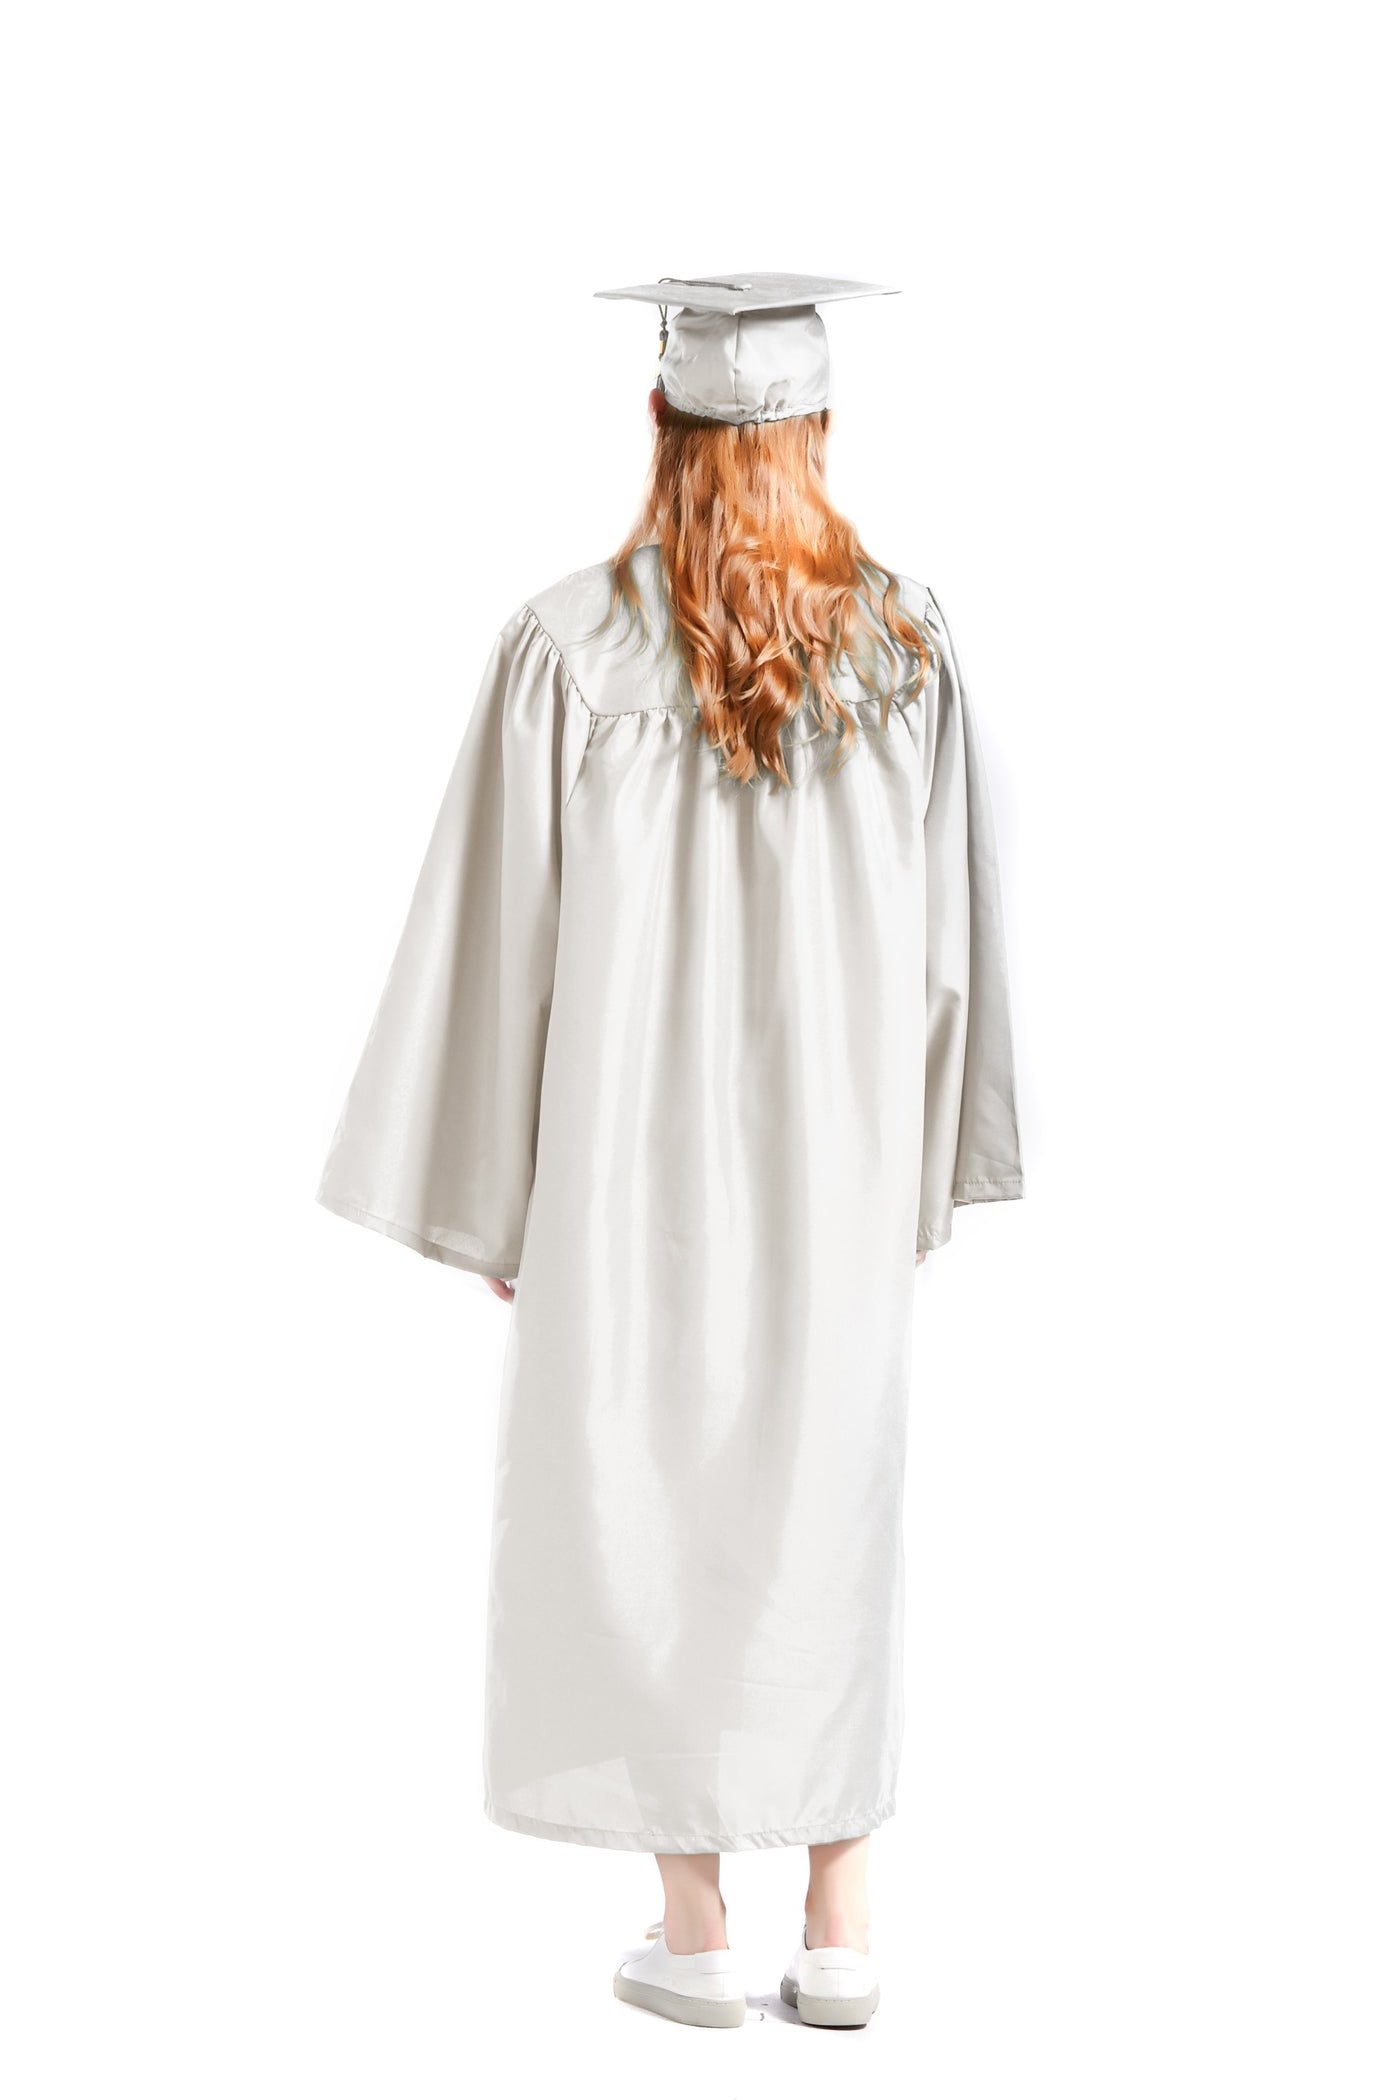 Graduation Cap Gown 2024 Year Charm for College or High School Graduates